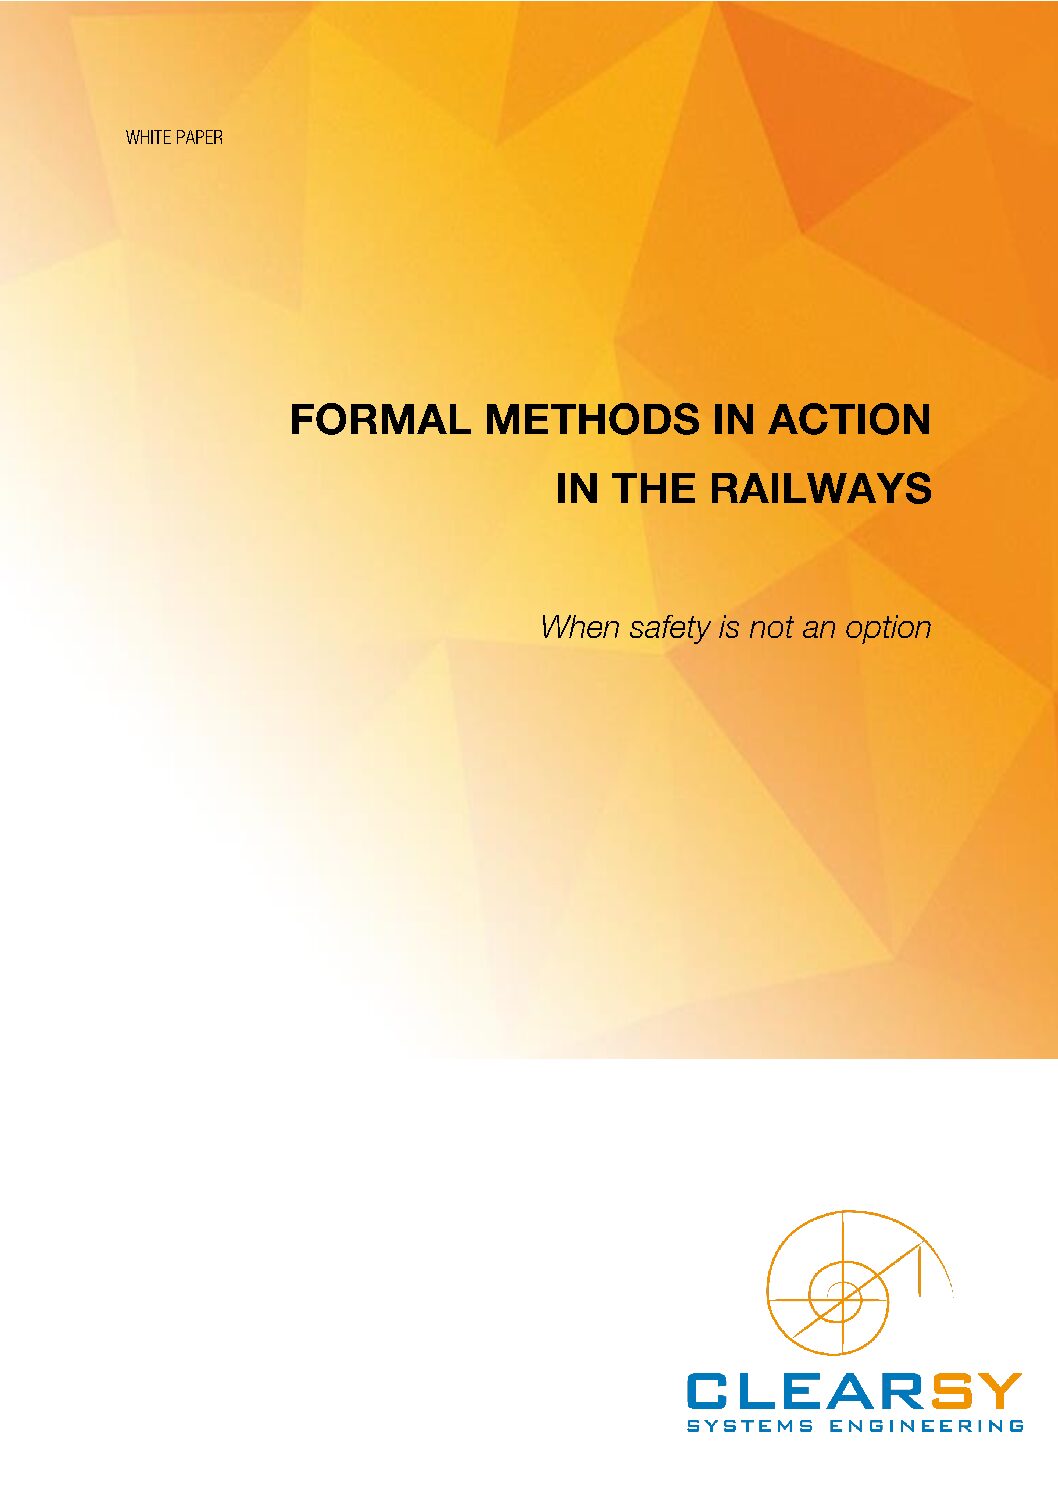 Formal Methods and Formal Data Validation for Railways